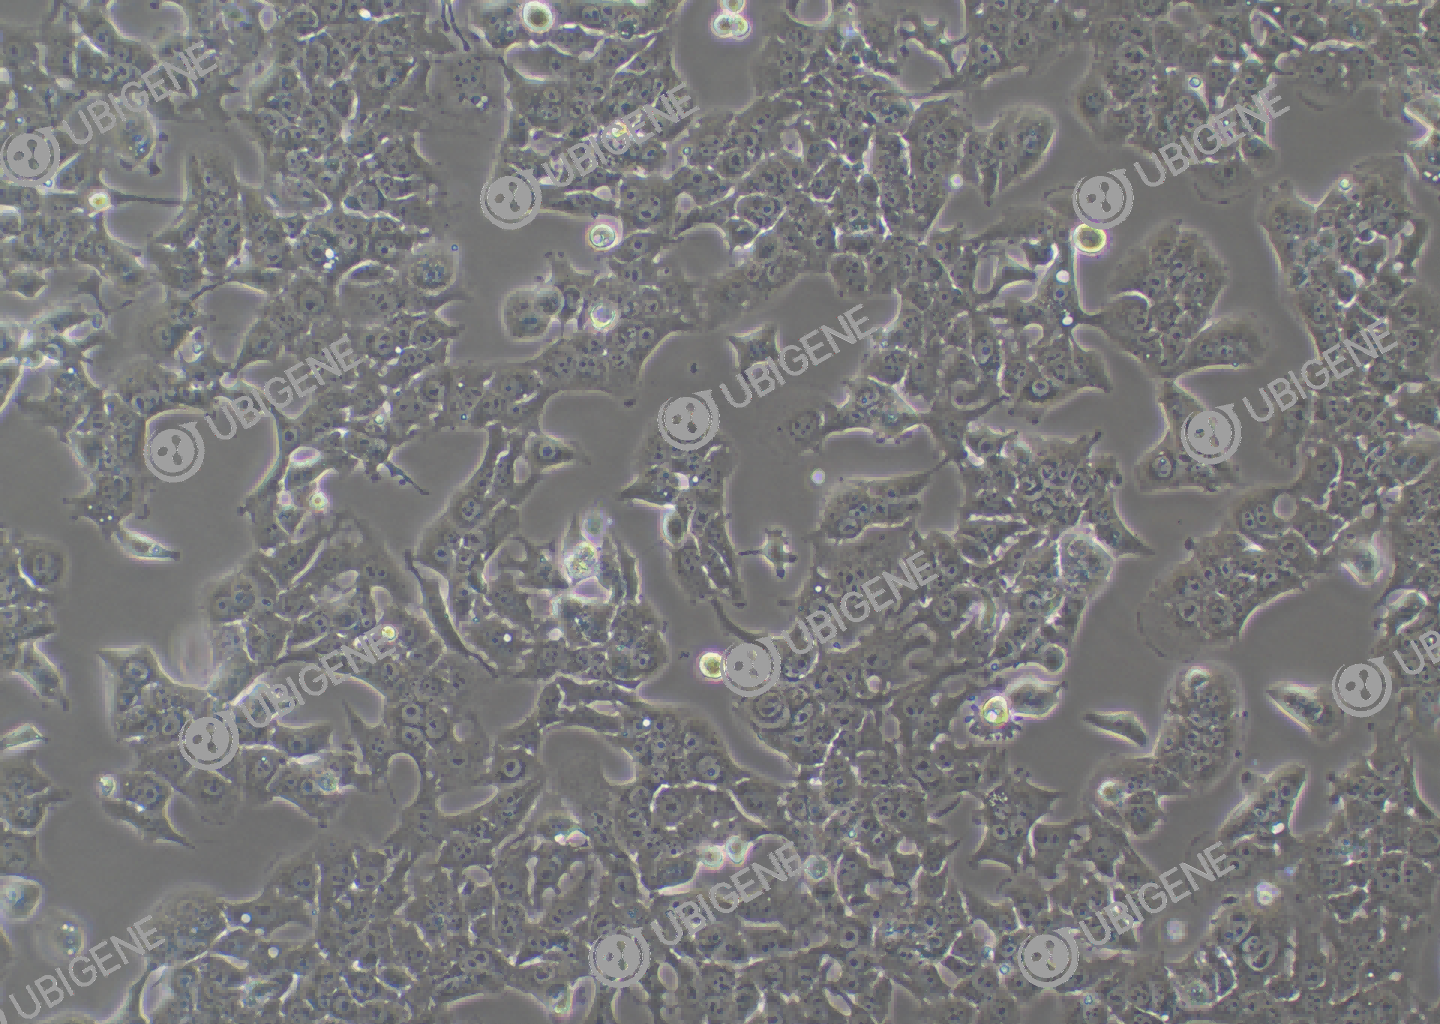 Hepa 1-6 cell line Cultured cell morphology